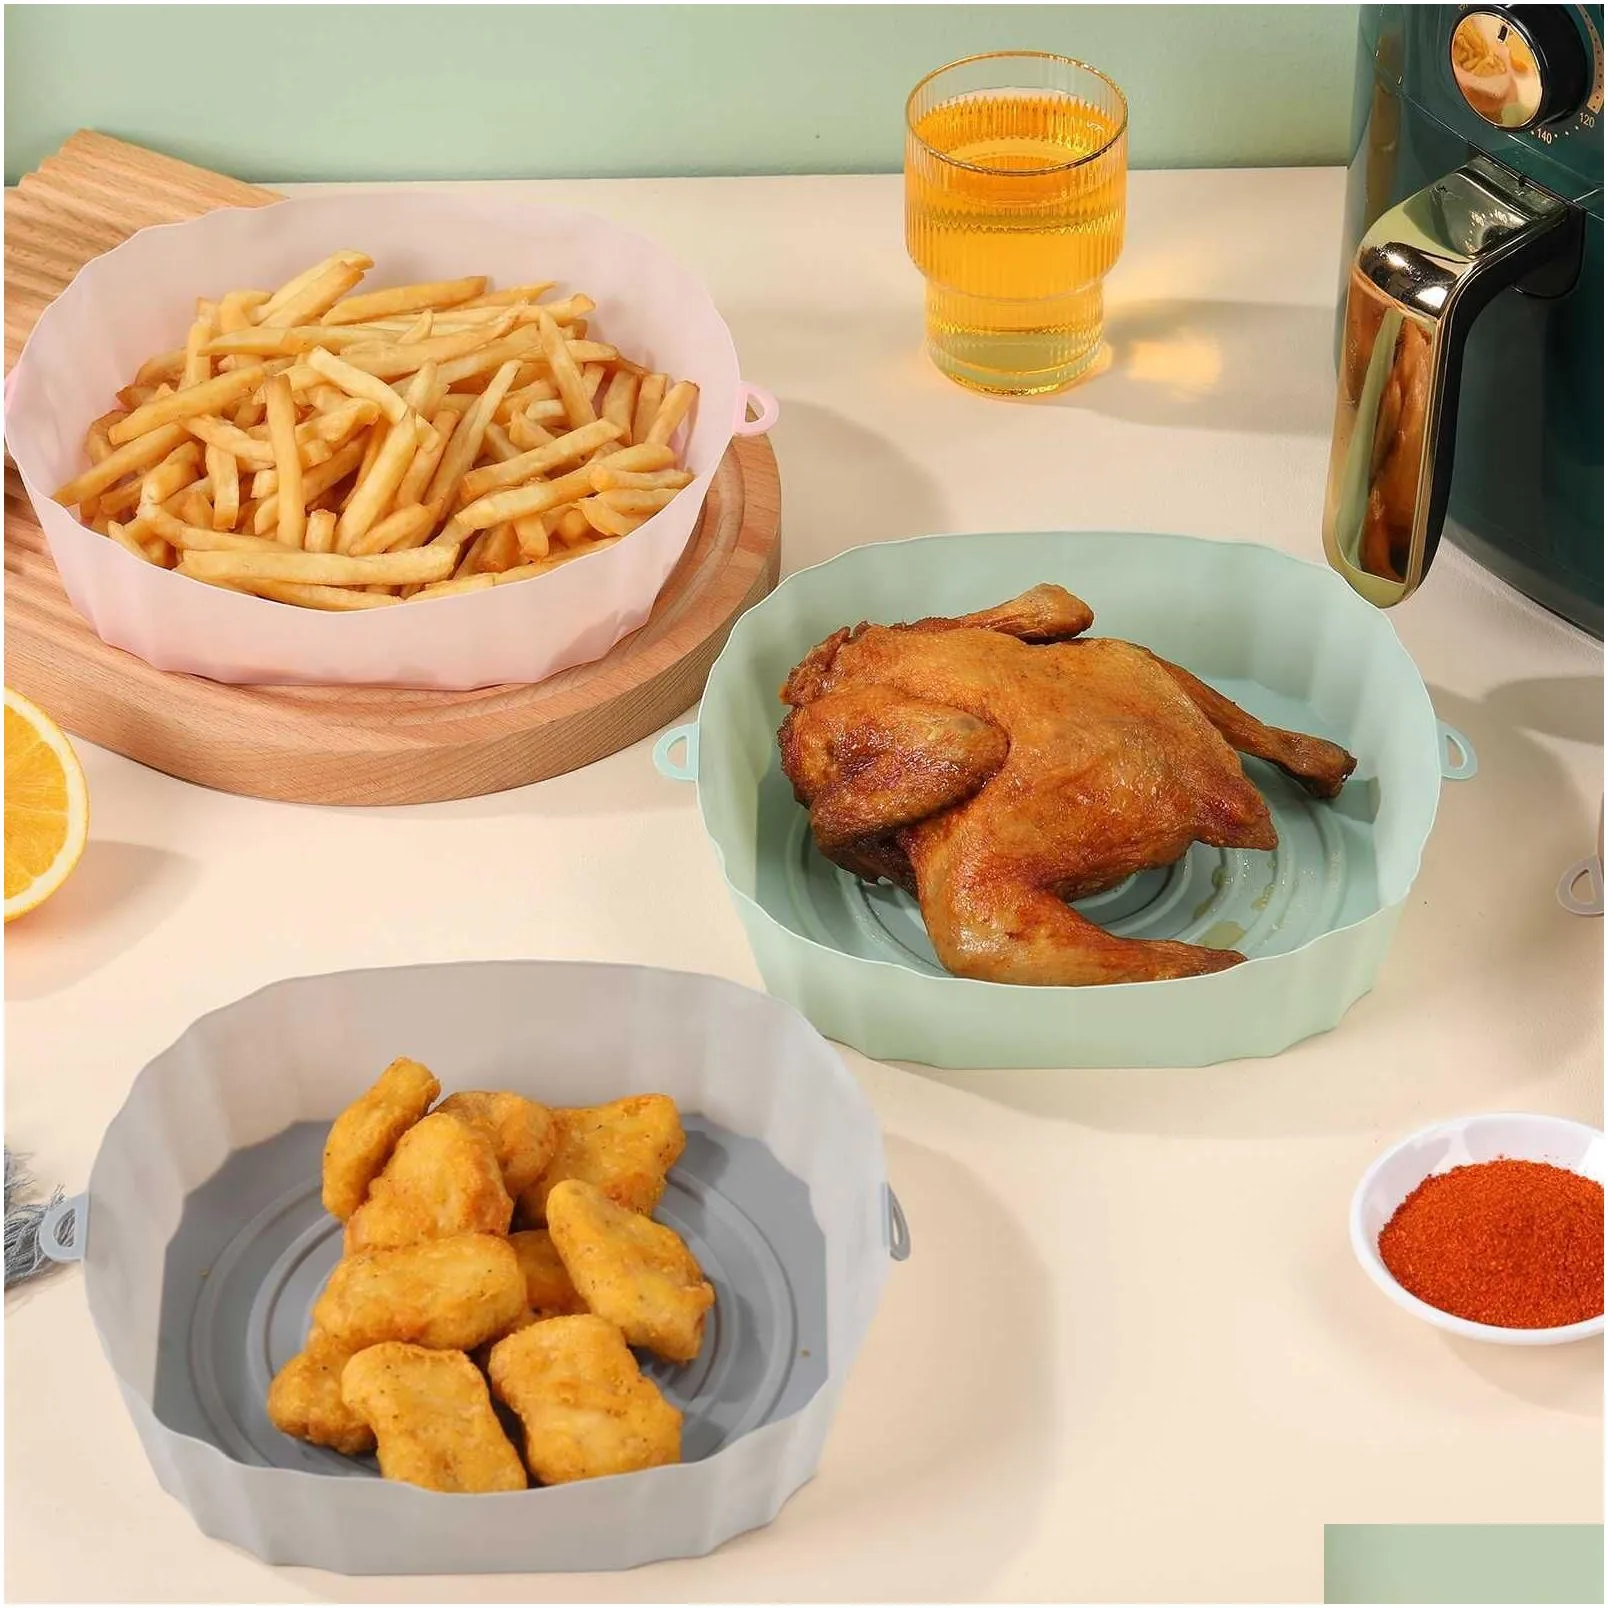  4pcs silicone air fryer basket airfryer oven mold baking tray pizza fried chicken basket reusable pan liner accessories